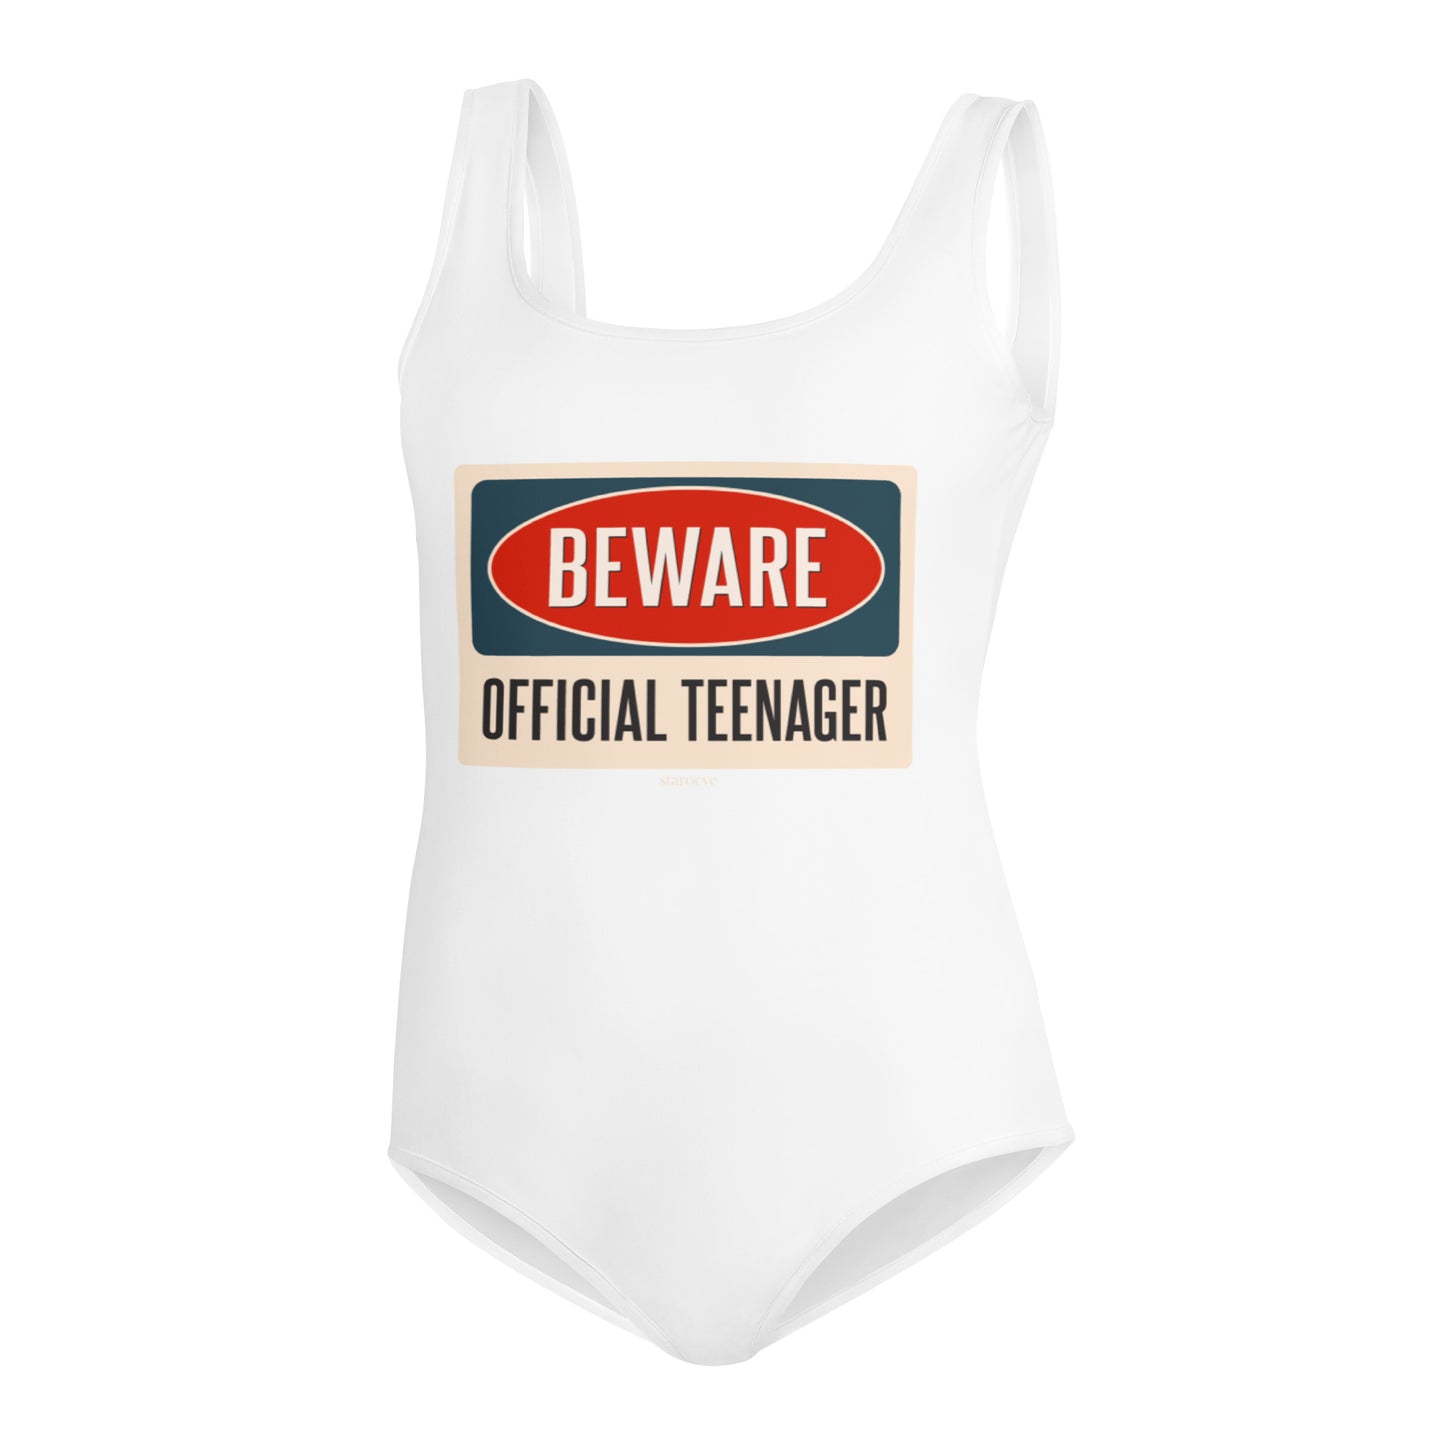 Official Teenager Youth Birthday Swimsuit, Beware 13 Years Old Teen Birthday Party One Piece Kids Bathing Suit Party Swimwear Gift Starcove Fashion